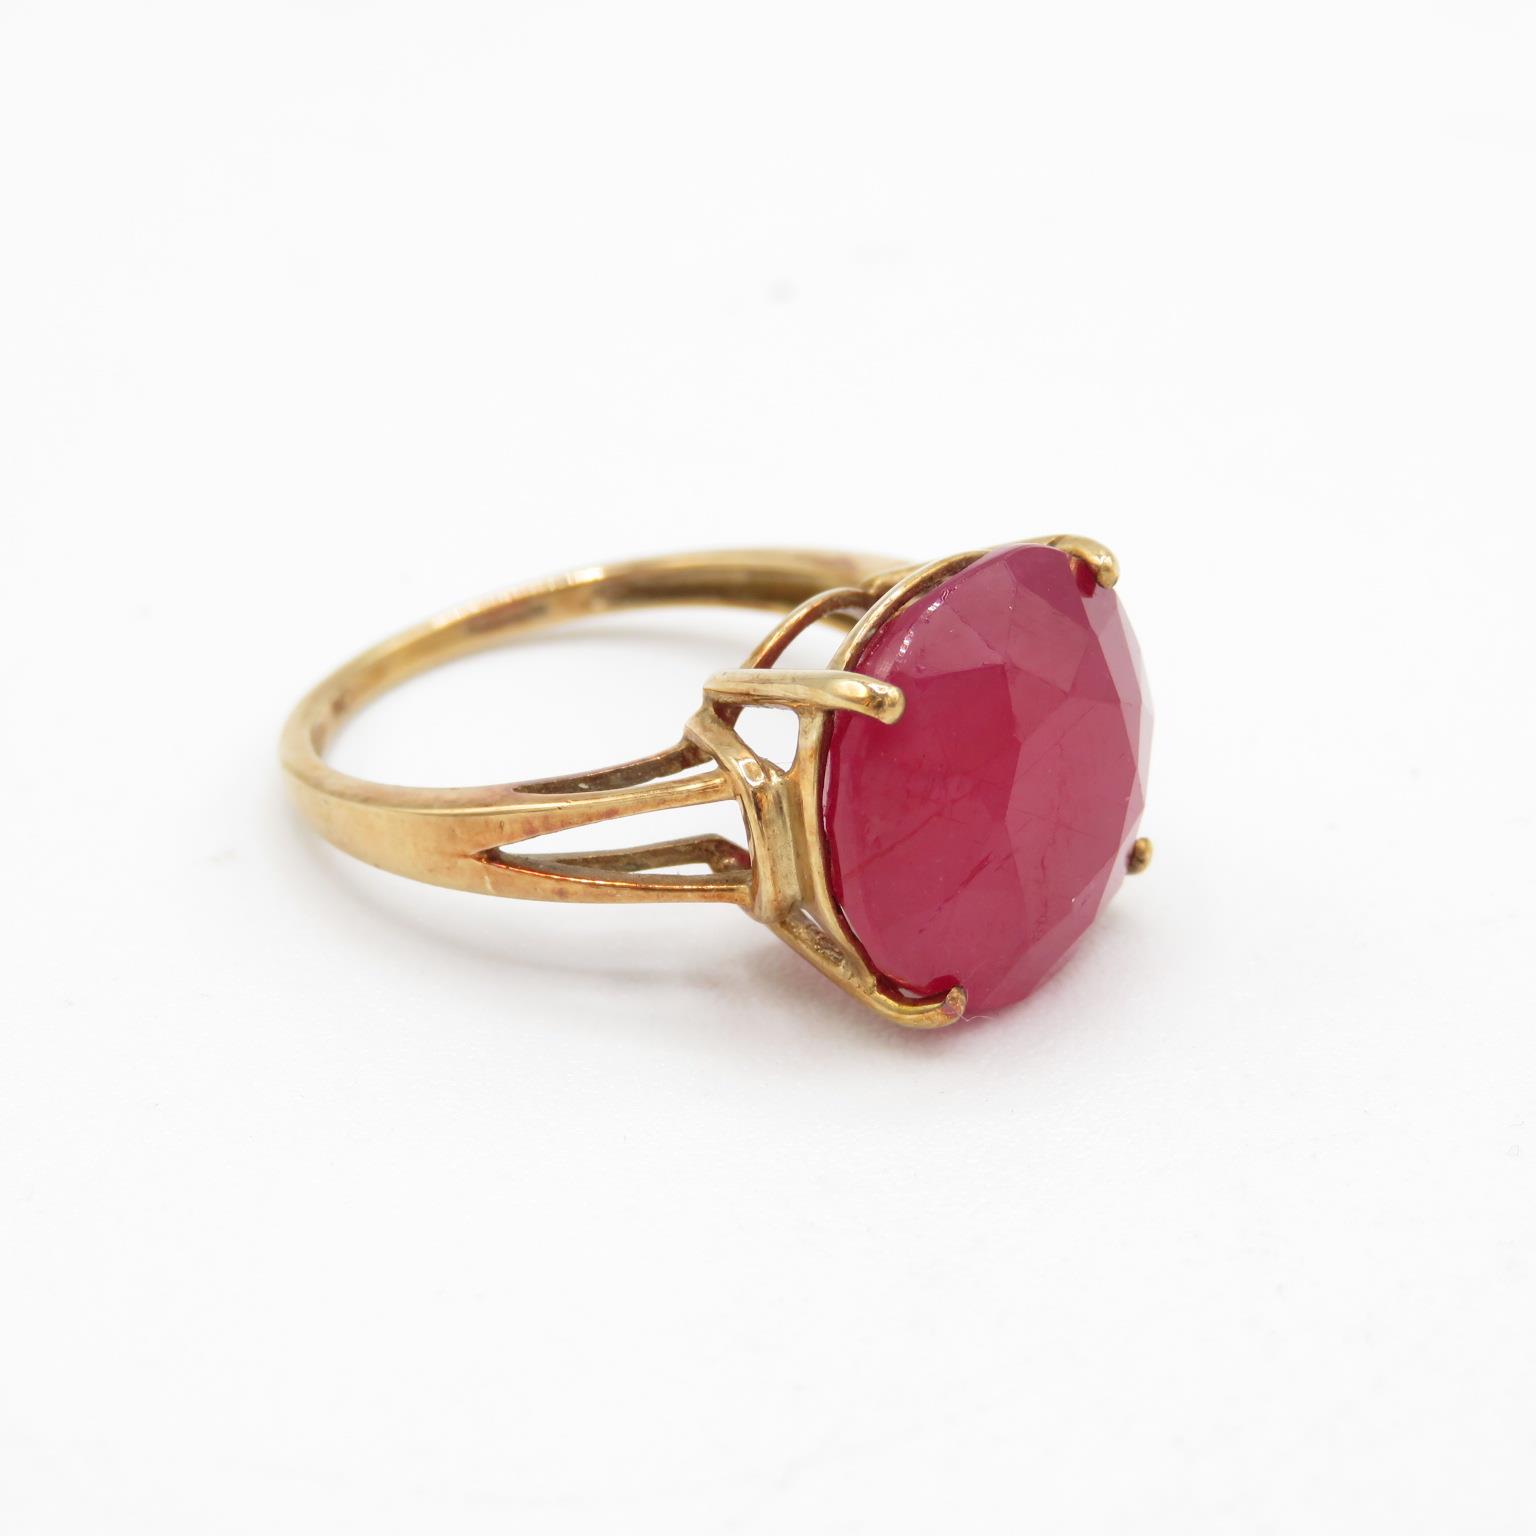 9ct gold round cut enhanced ruby dress ring, four claw set Size O - 4.2 g - Image 3 of 4